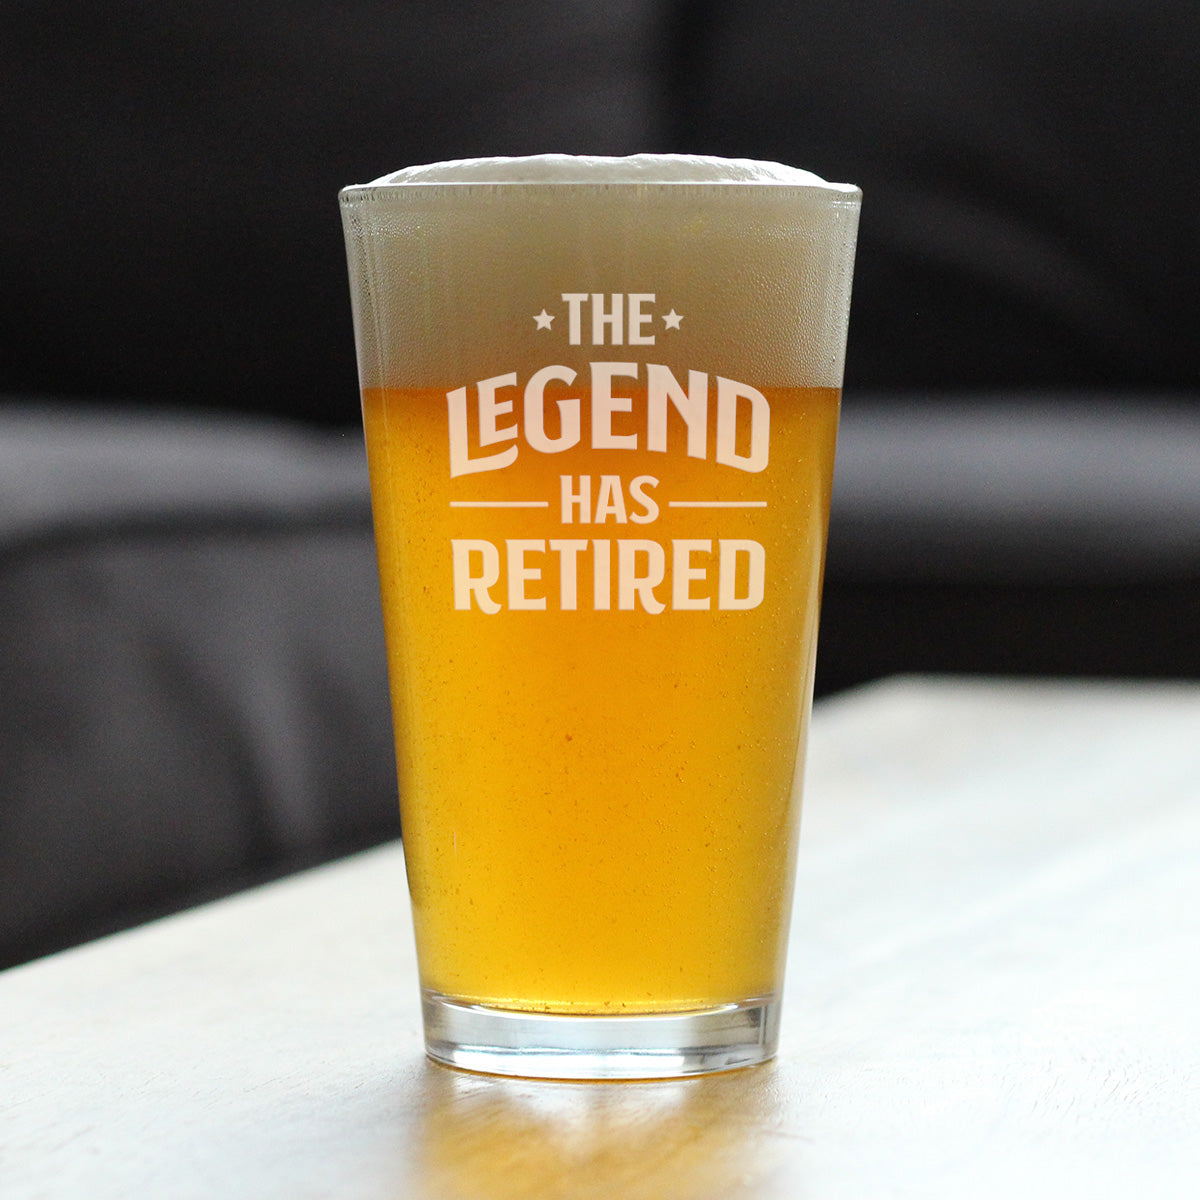 The Legend Has Retired - Pint Glass for Beer - Funny Retirement Gifts for Boss or Coworkers - 16 Oz